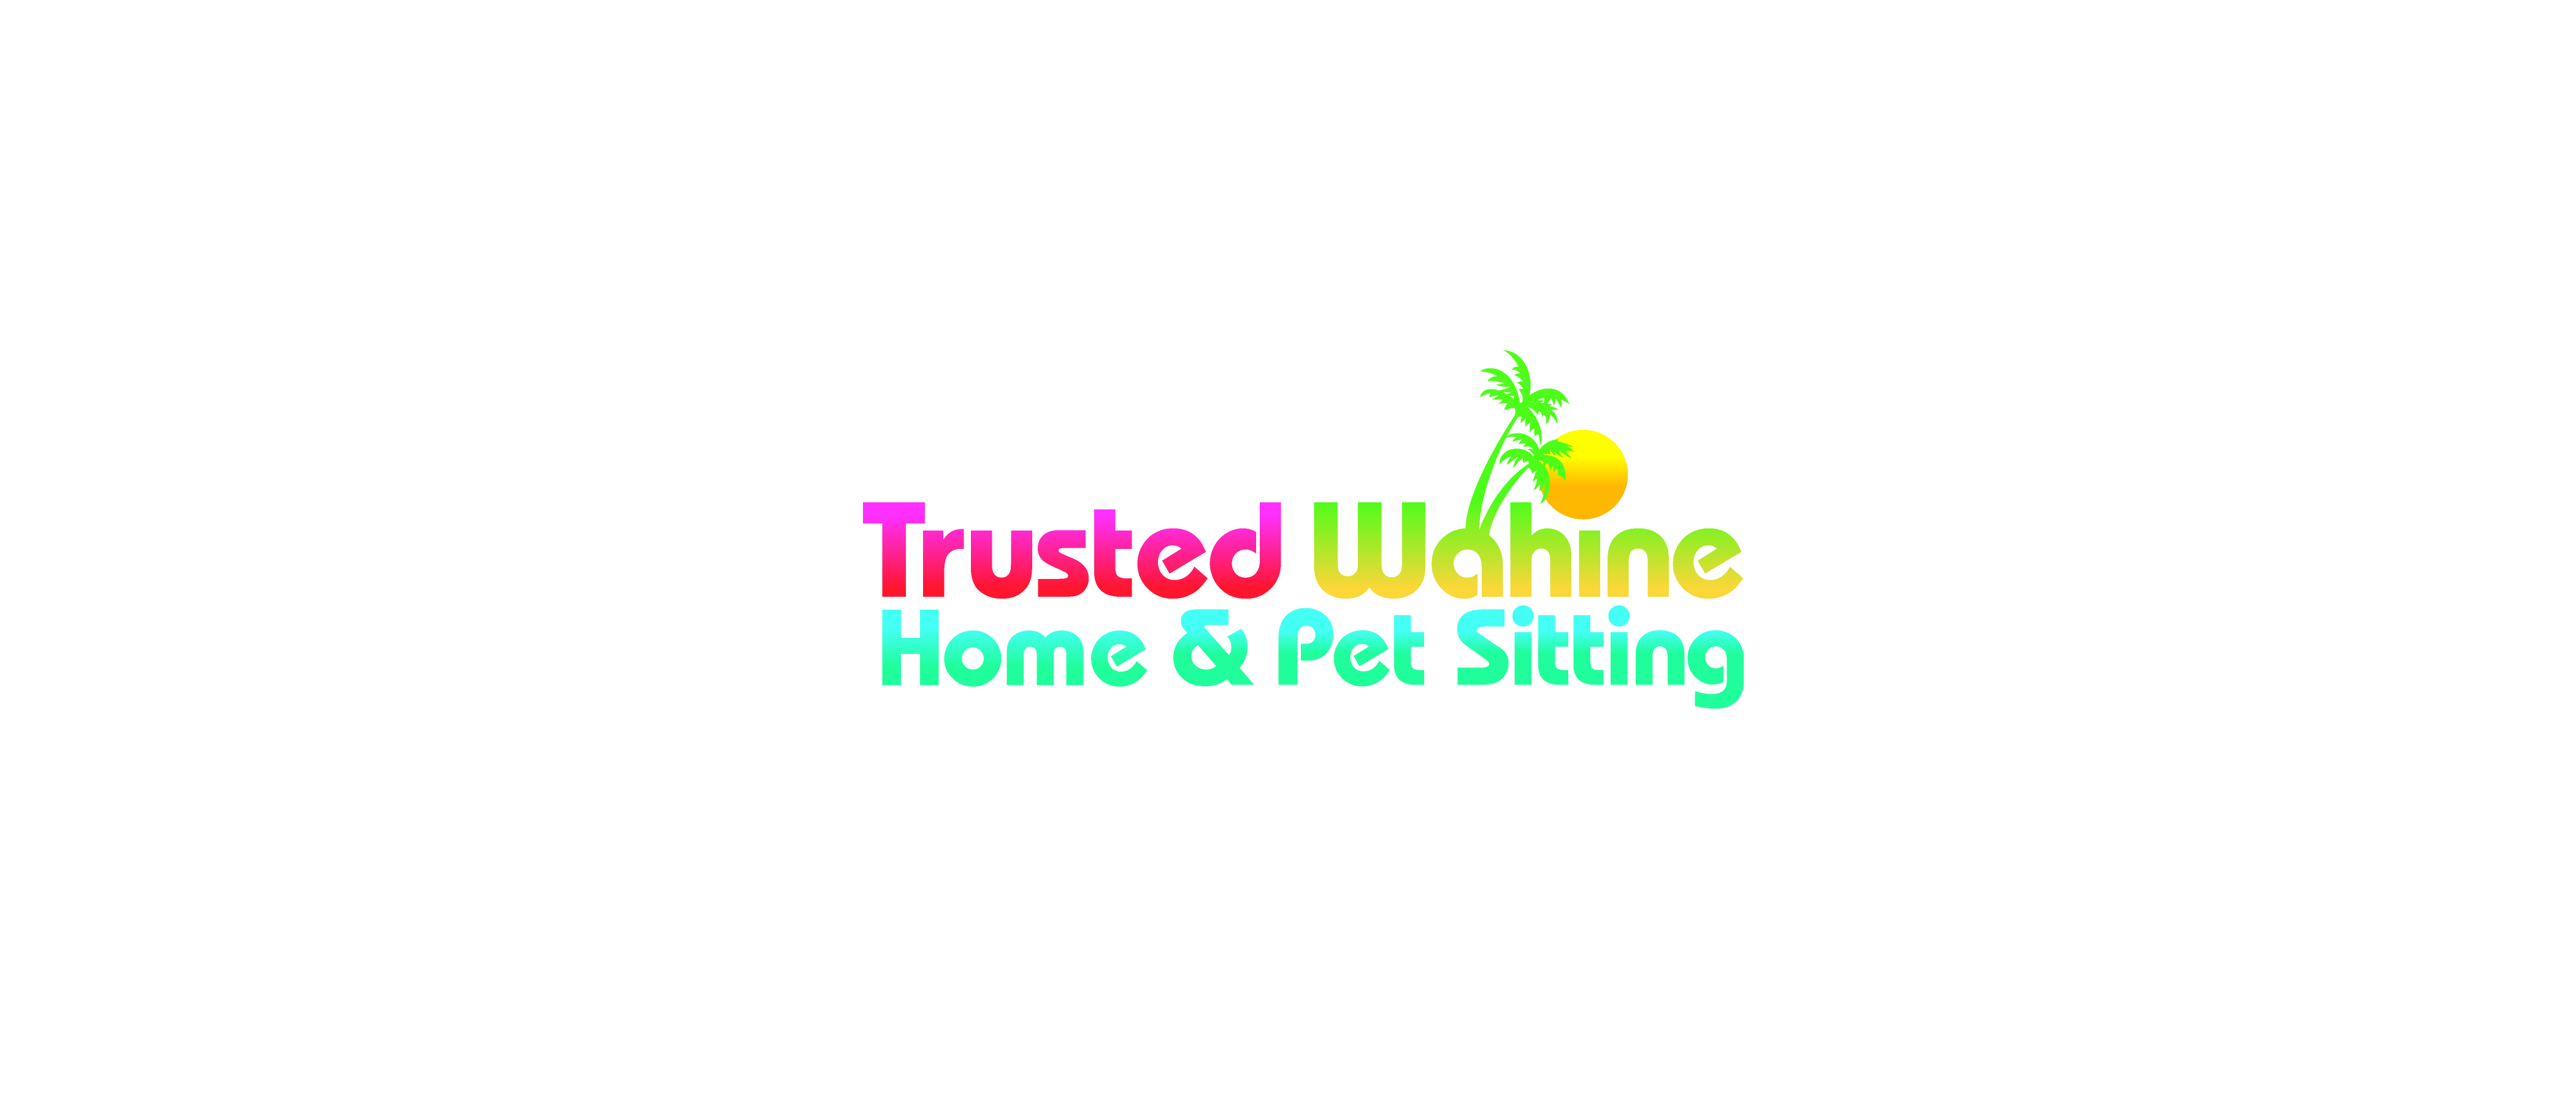 Trusted Wahine House & Pet Sitting